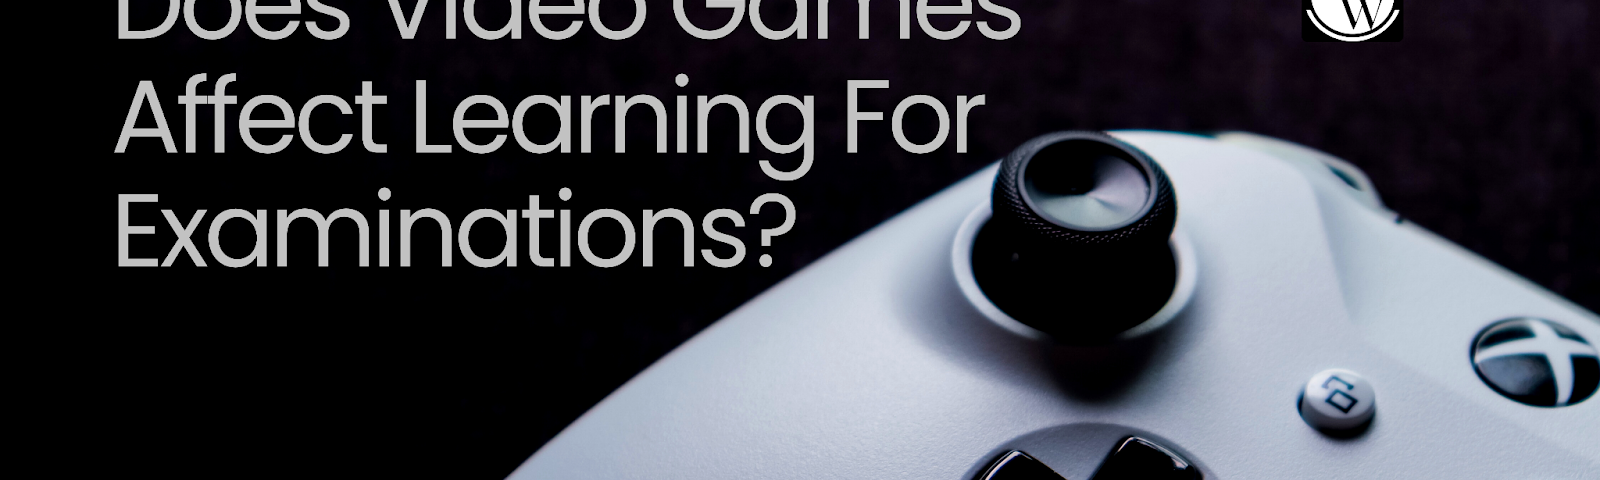 Does Video Games Affect Learning For Examinations?